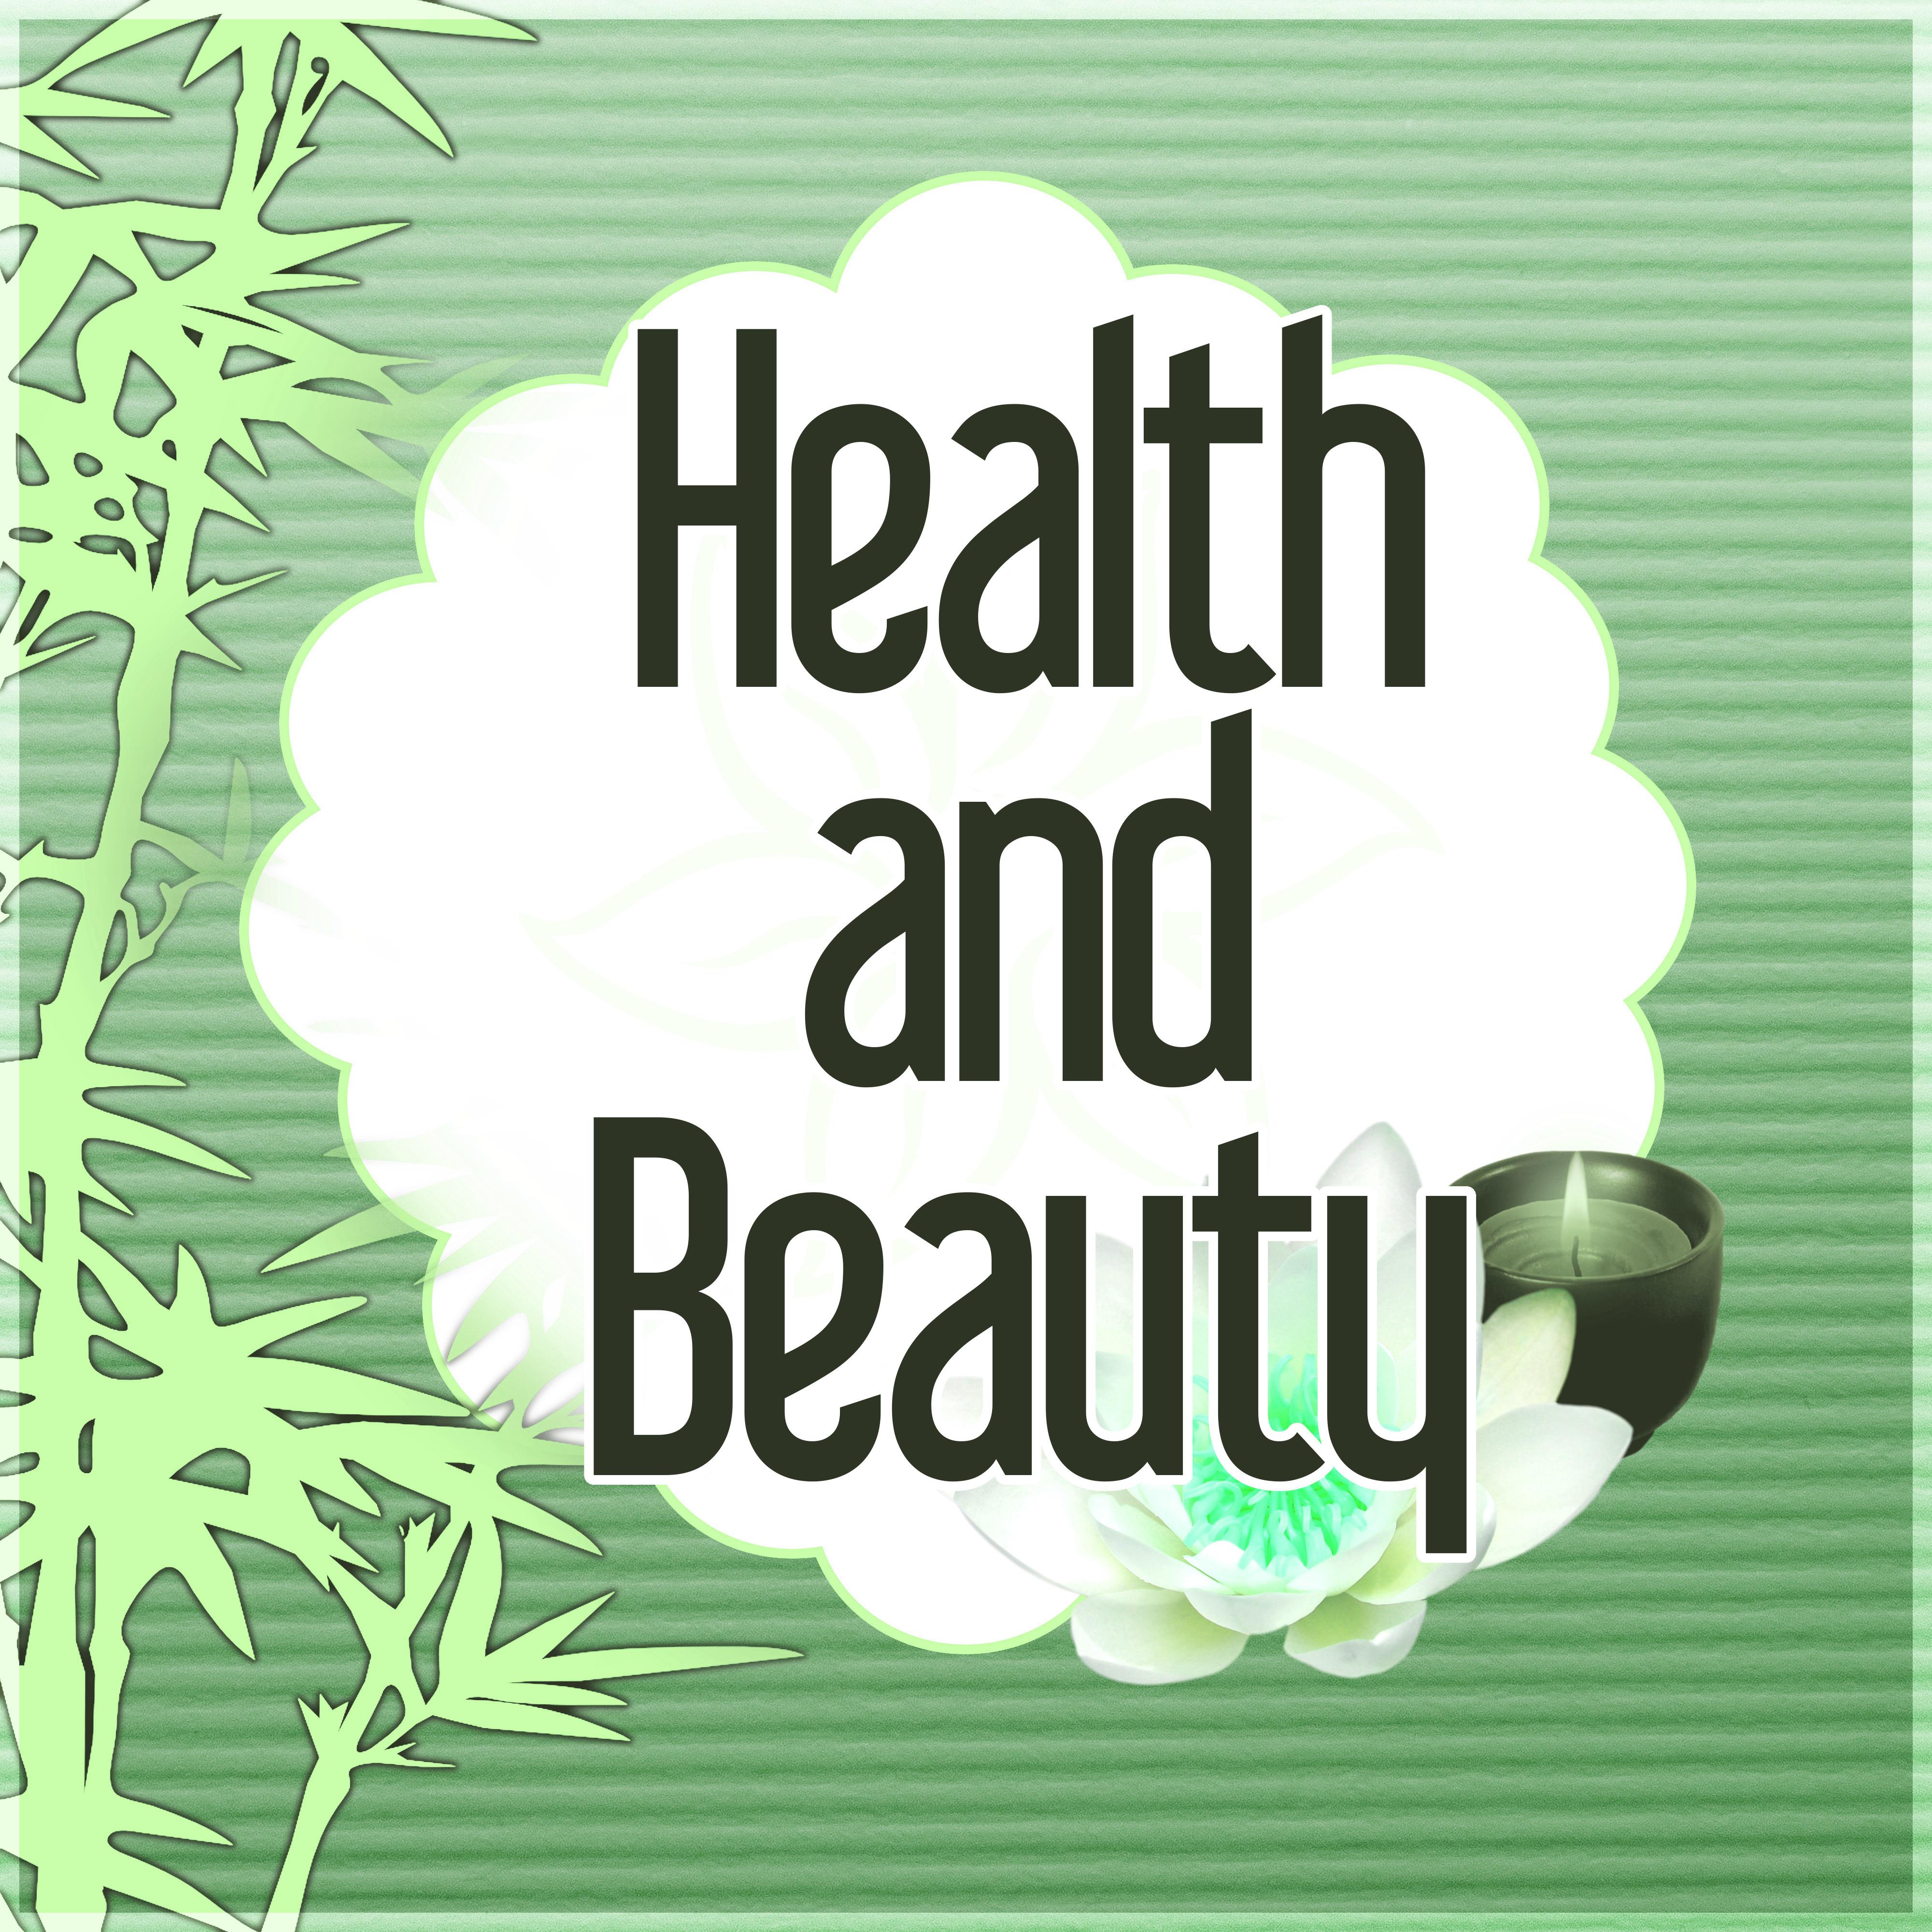 Health and Beauty - Natural Spa Music and Tranquility Spa, Sounds of Nature, New Age, Mindfulness Meditation, Sleep Music and Spa Dreams, Reiki, Healing Massage